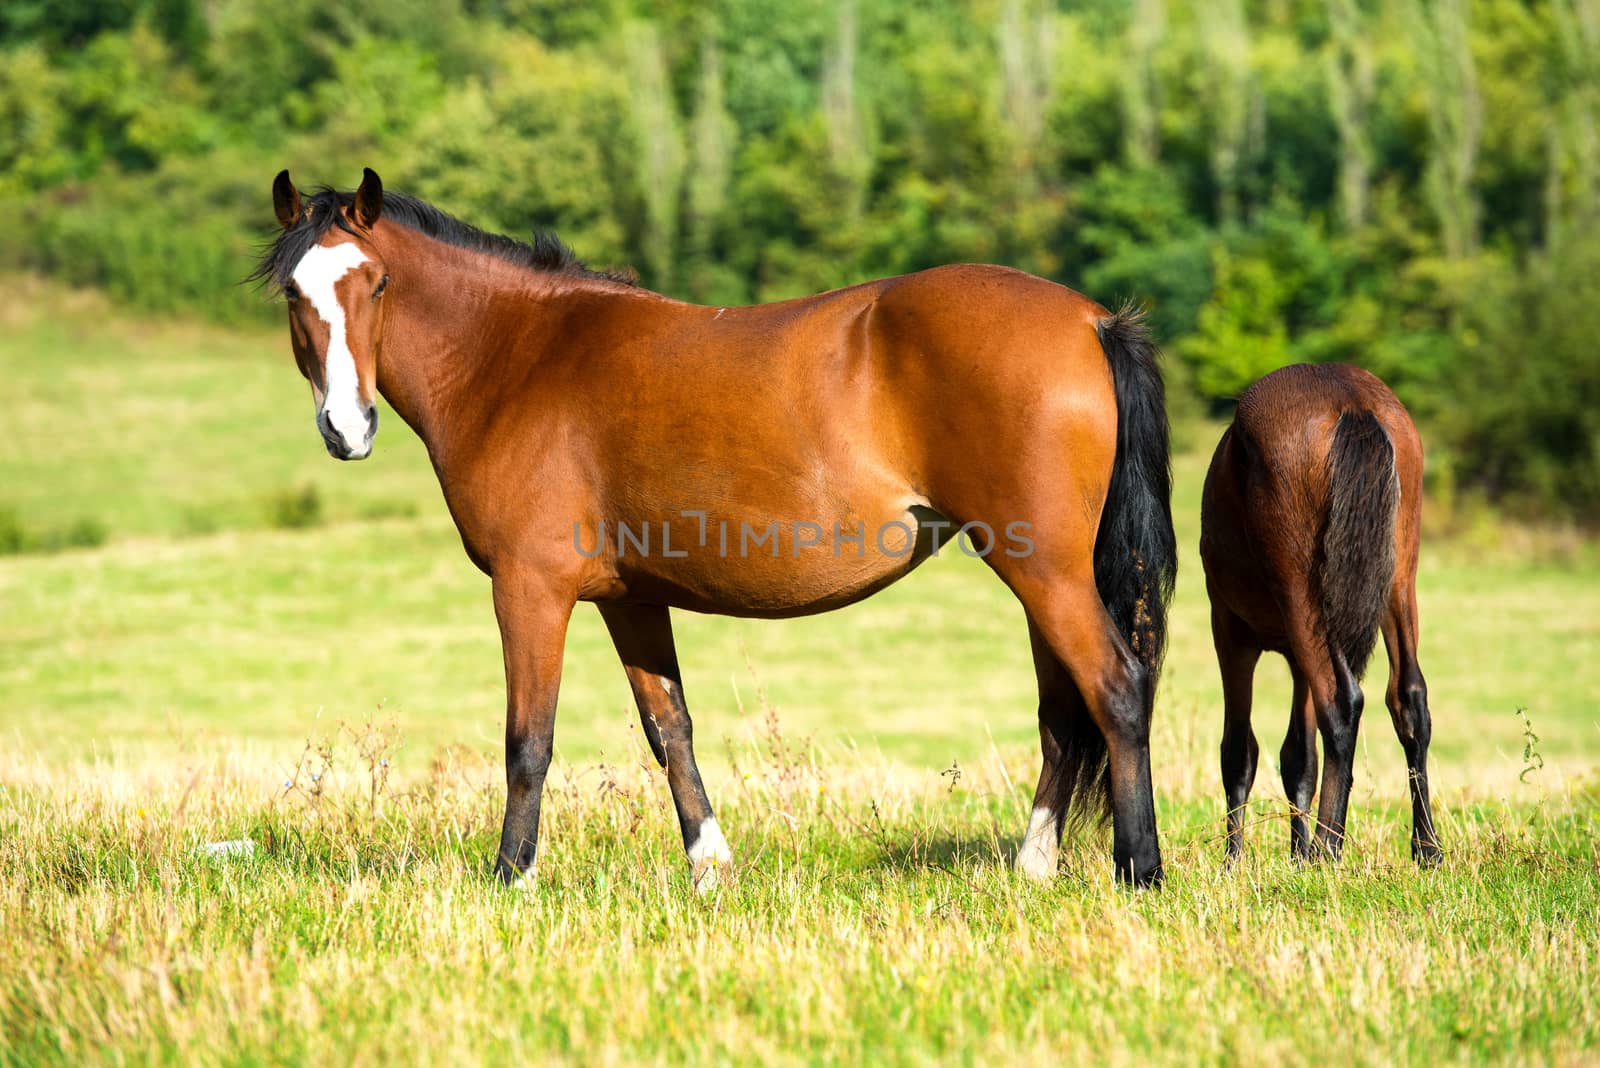 Dark bay horses in a meadow with green grass. Nature landscape